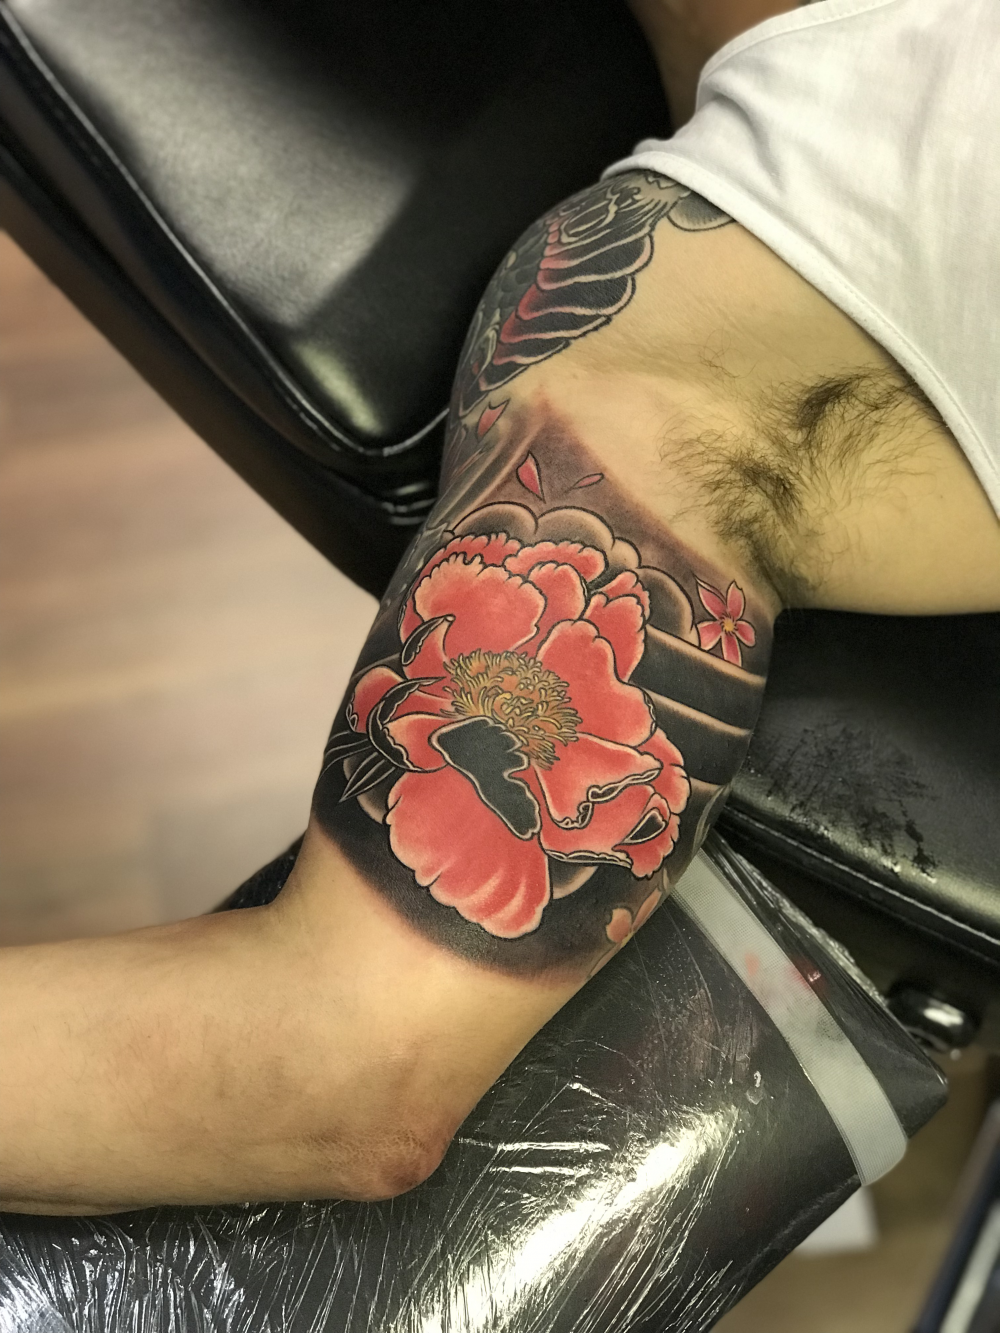 Cover Up in progress